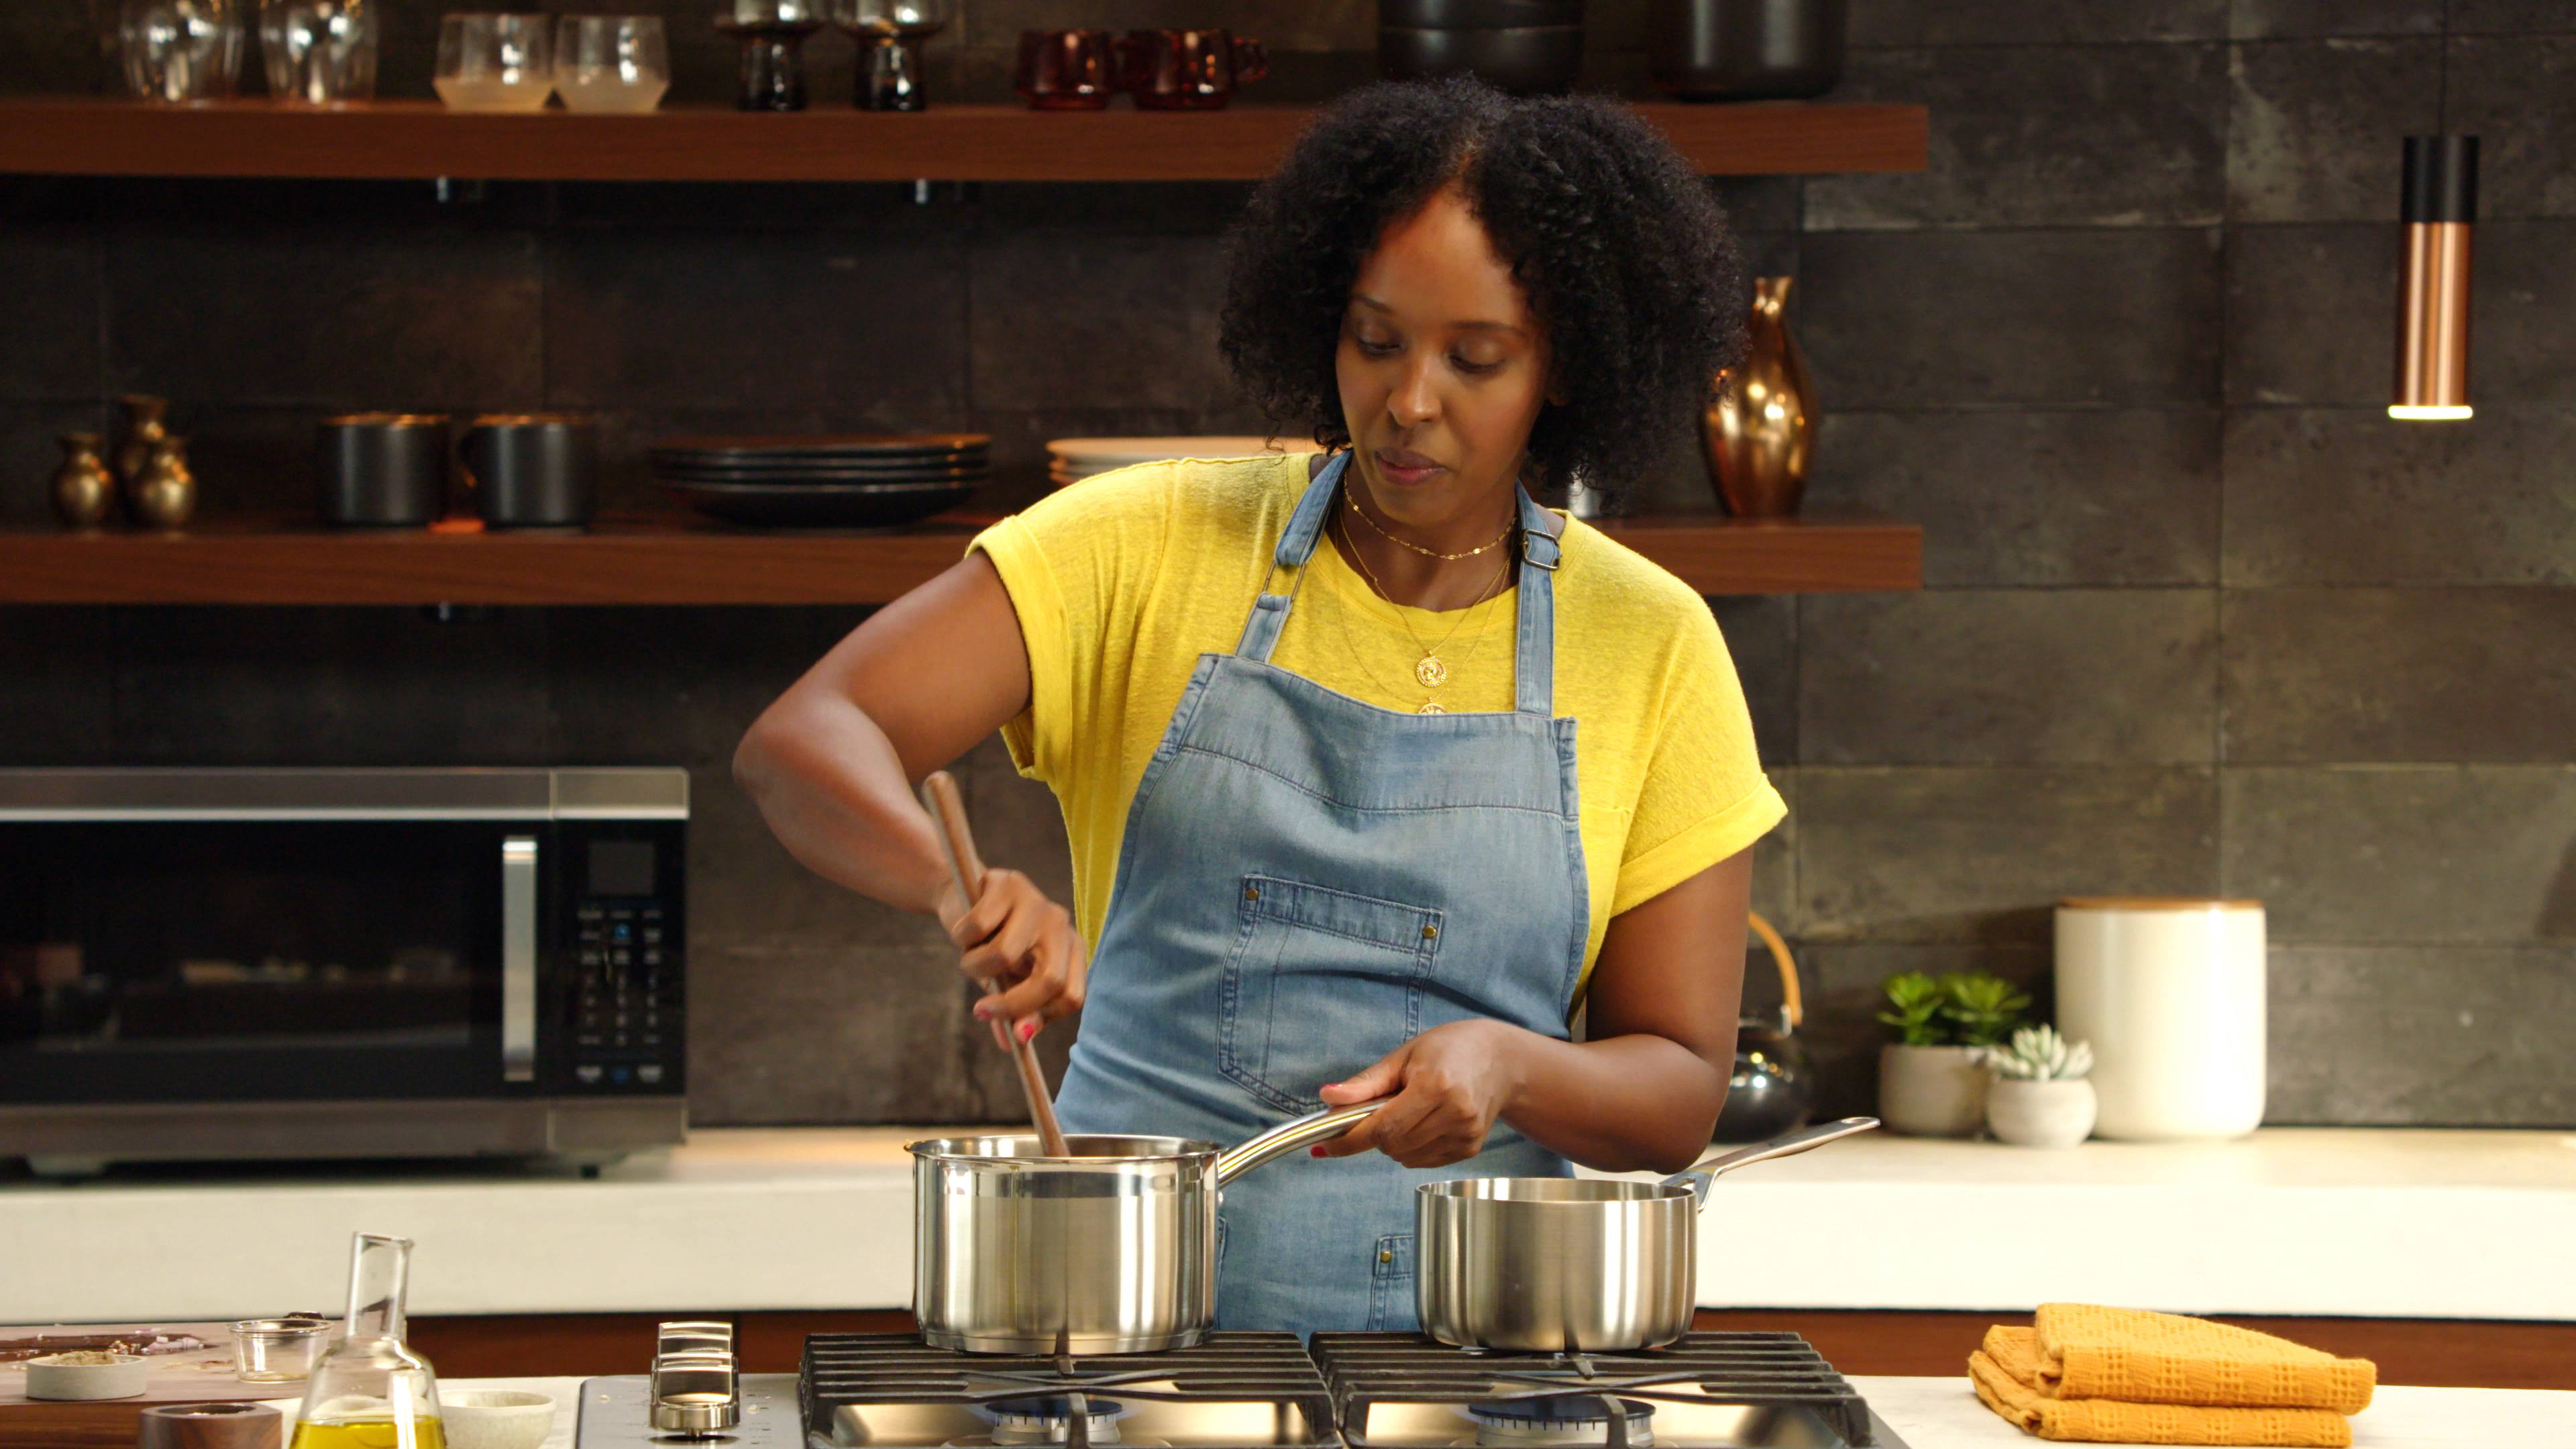 Amazon, Tastemade & Genesis Motors are Launching a Shoppable Cooking Series